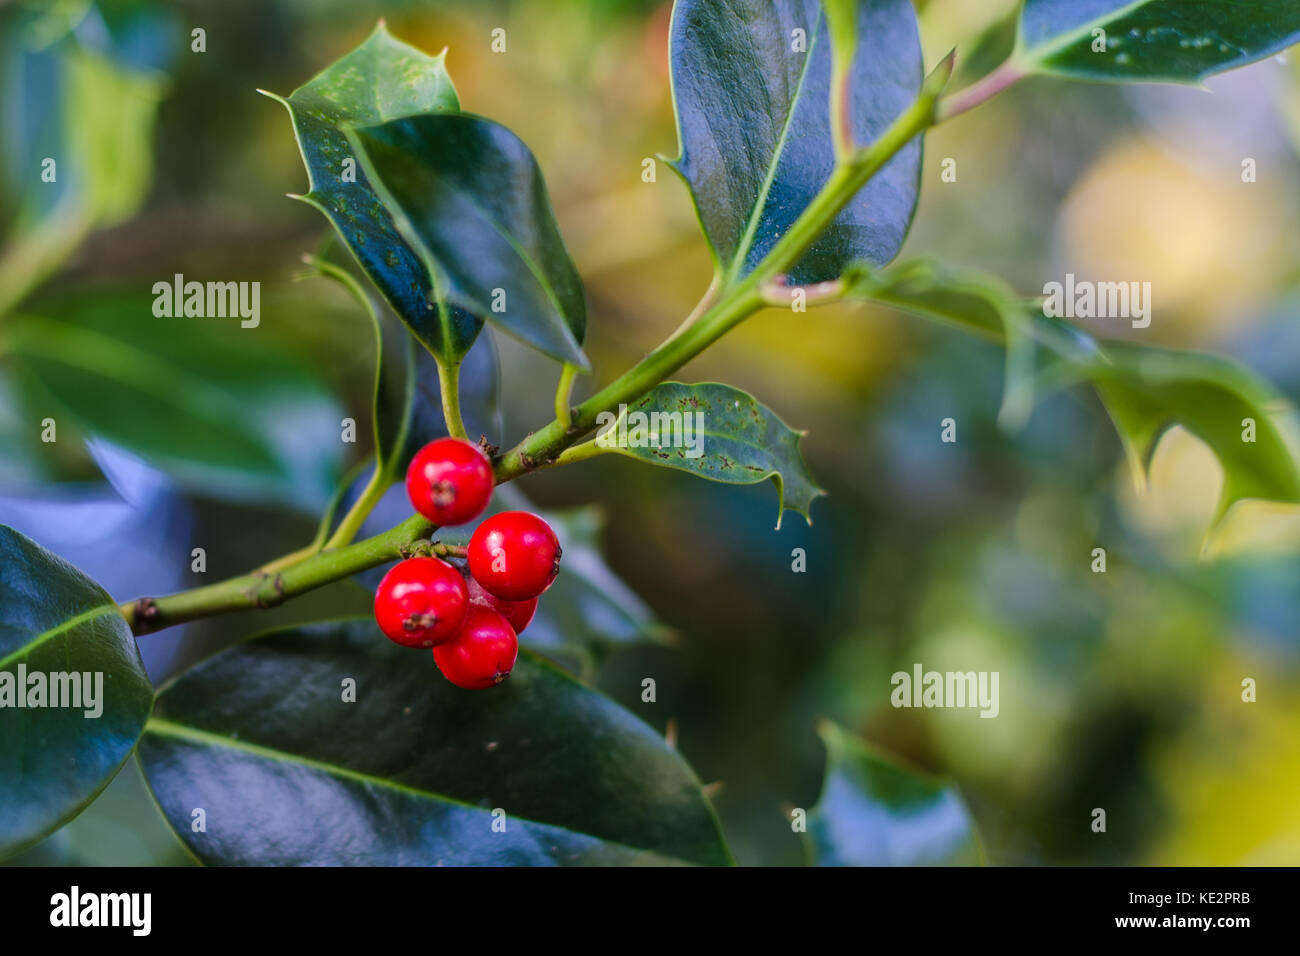 detail of red holly berry Stock Photo